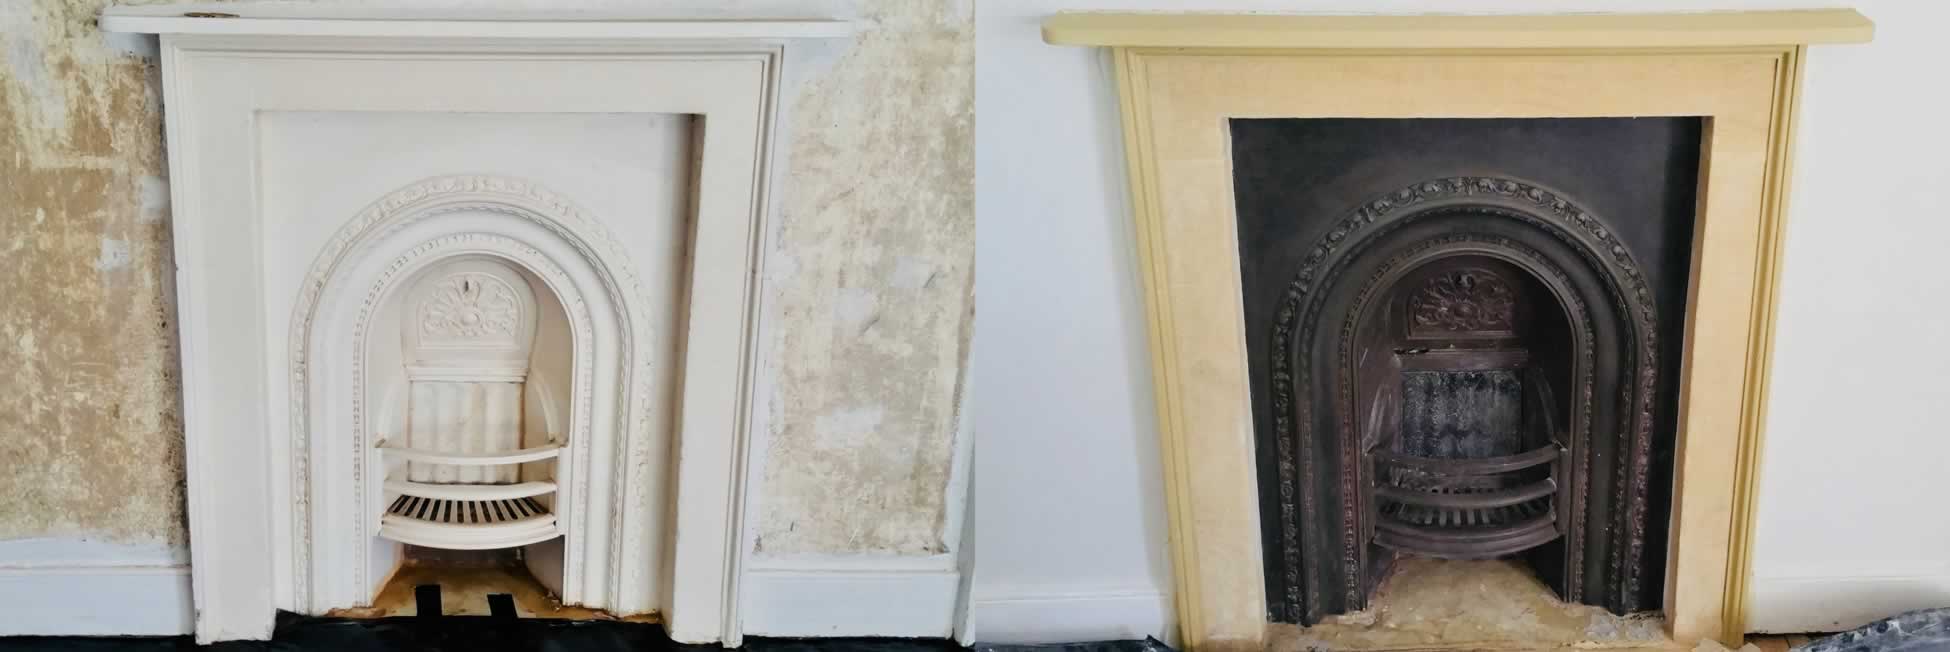 fireplace restoration and cleaning in bath